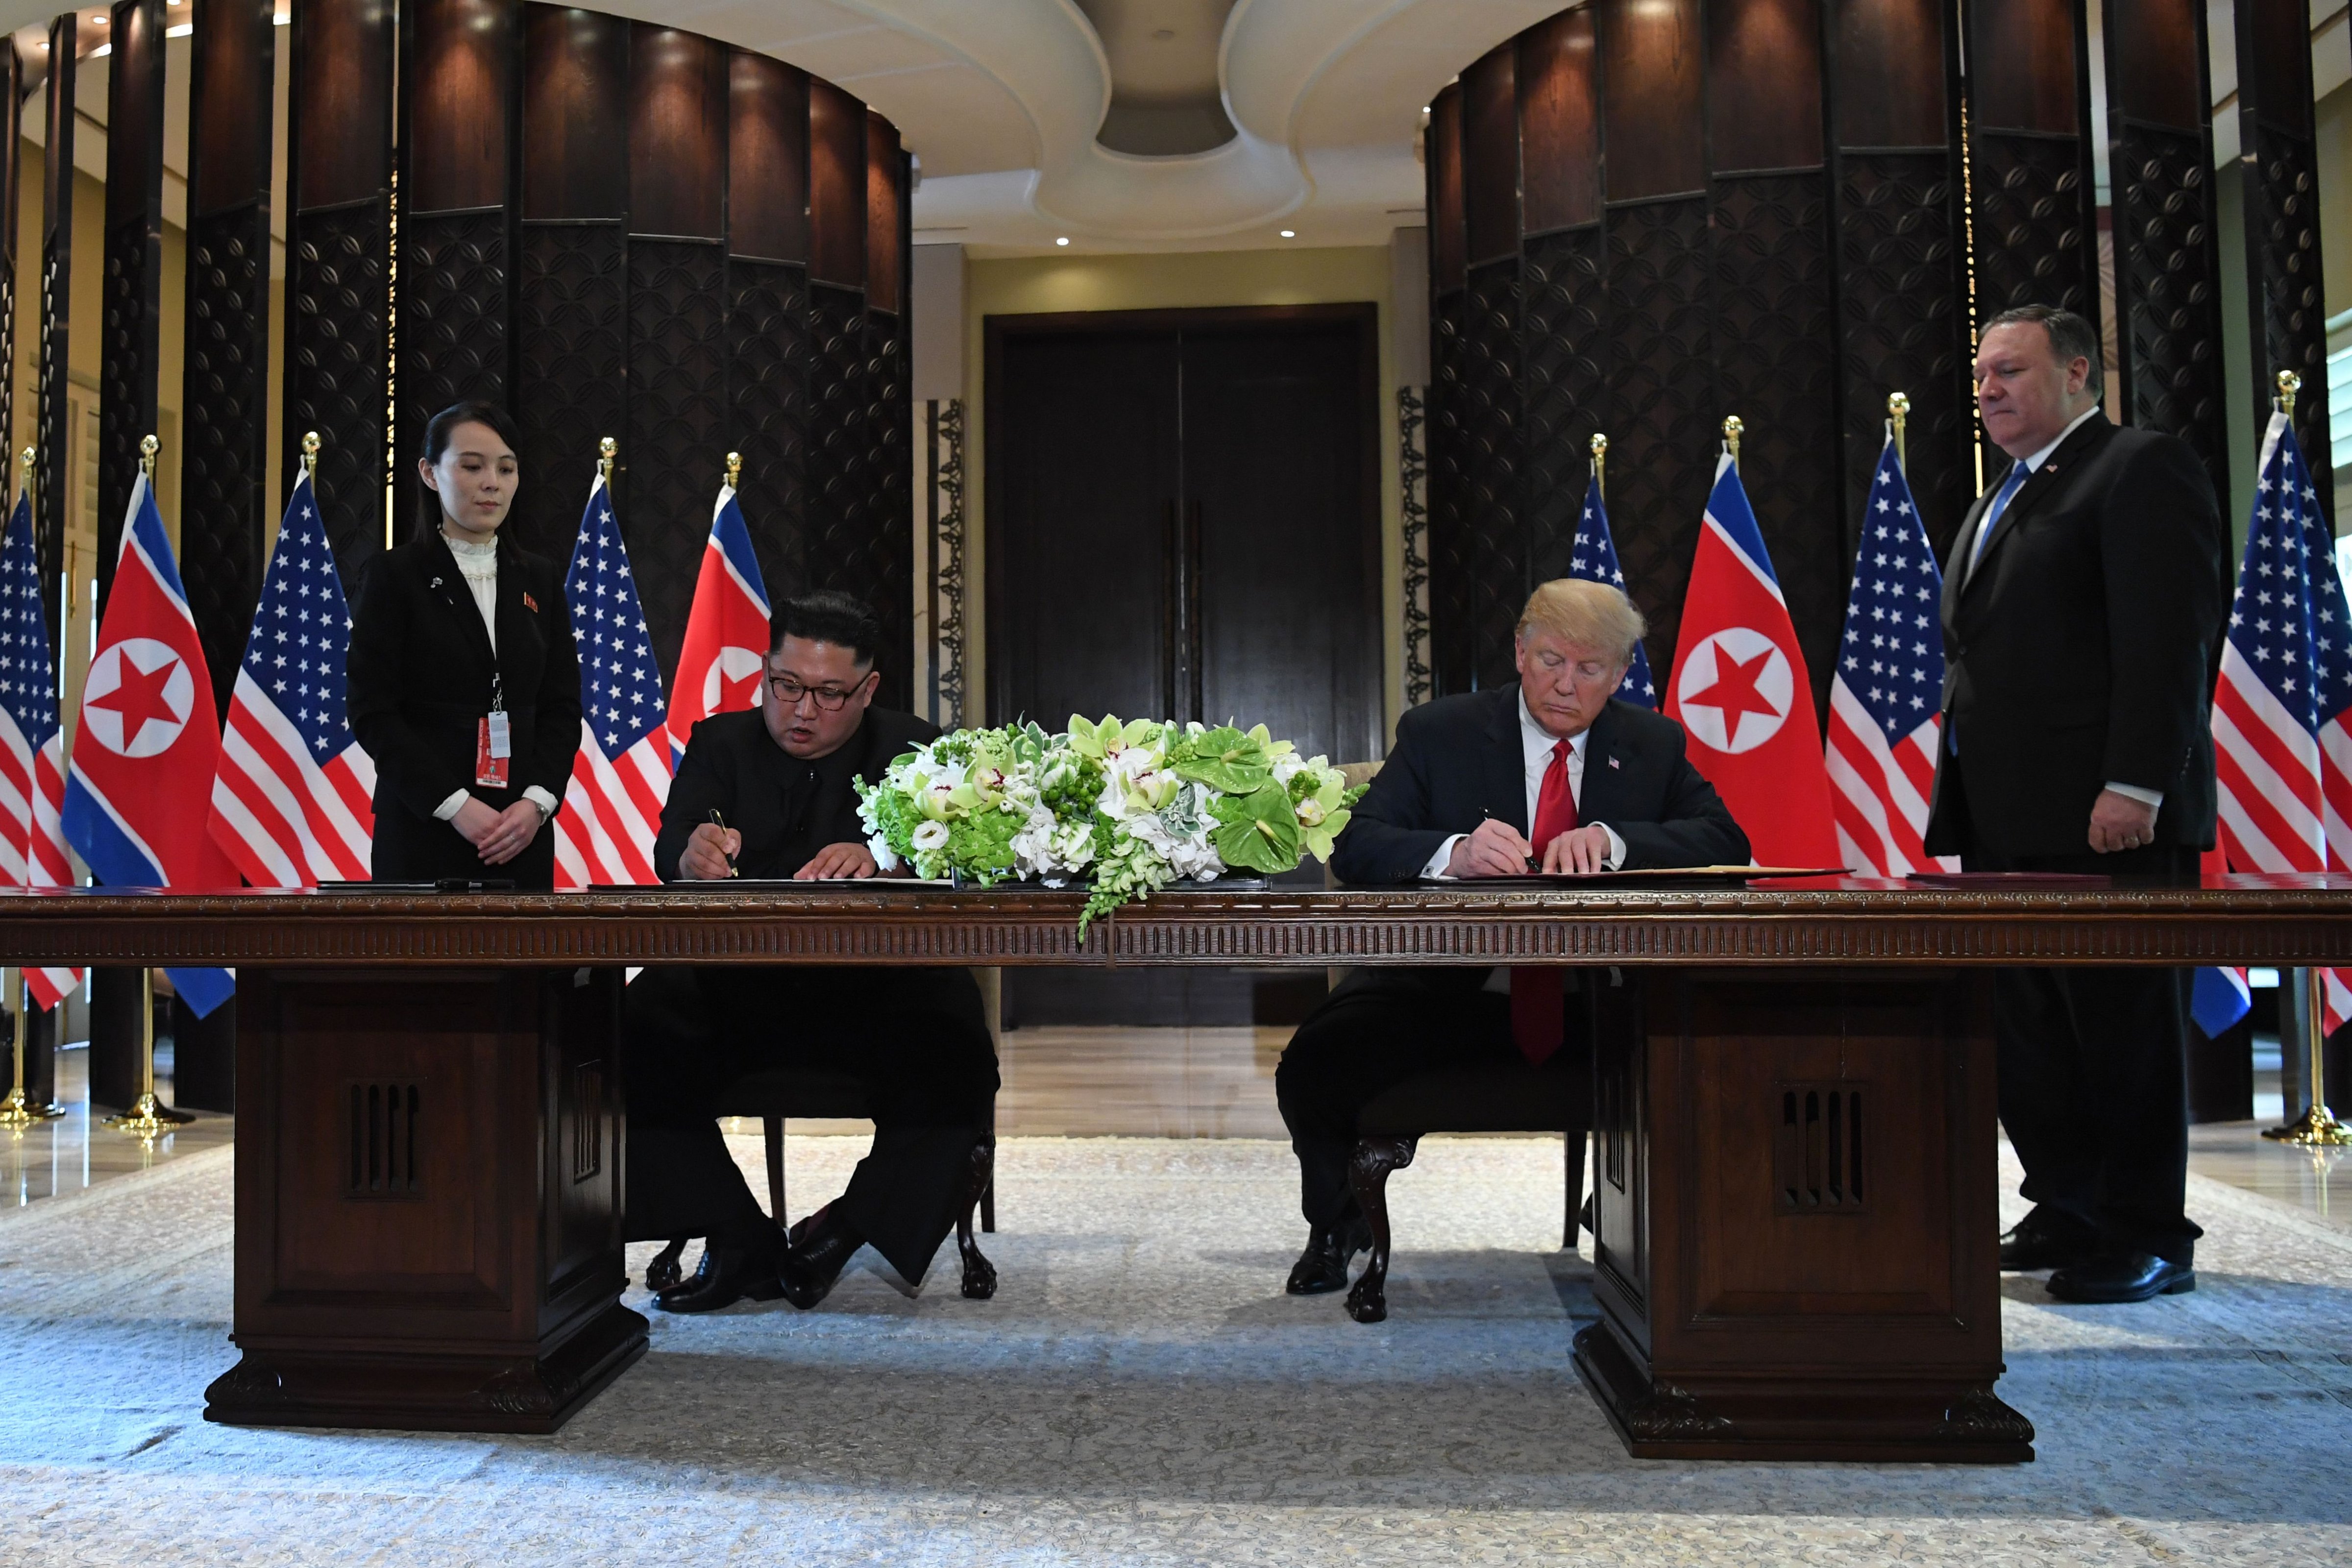 President Donald Trump and North Korea's leader Kim Jong Un sign documents as U.S. Secretary of State Mike Pompeo and the North Korean leader's sister Kim Yo Jong look on at a signing ceremony at the Capella Hotel on Sentosa island in Singapore on June 12, 2018. (Saul Loeb—AFP/Getty Images)